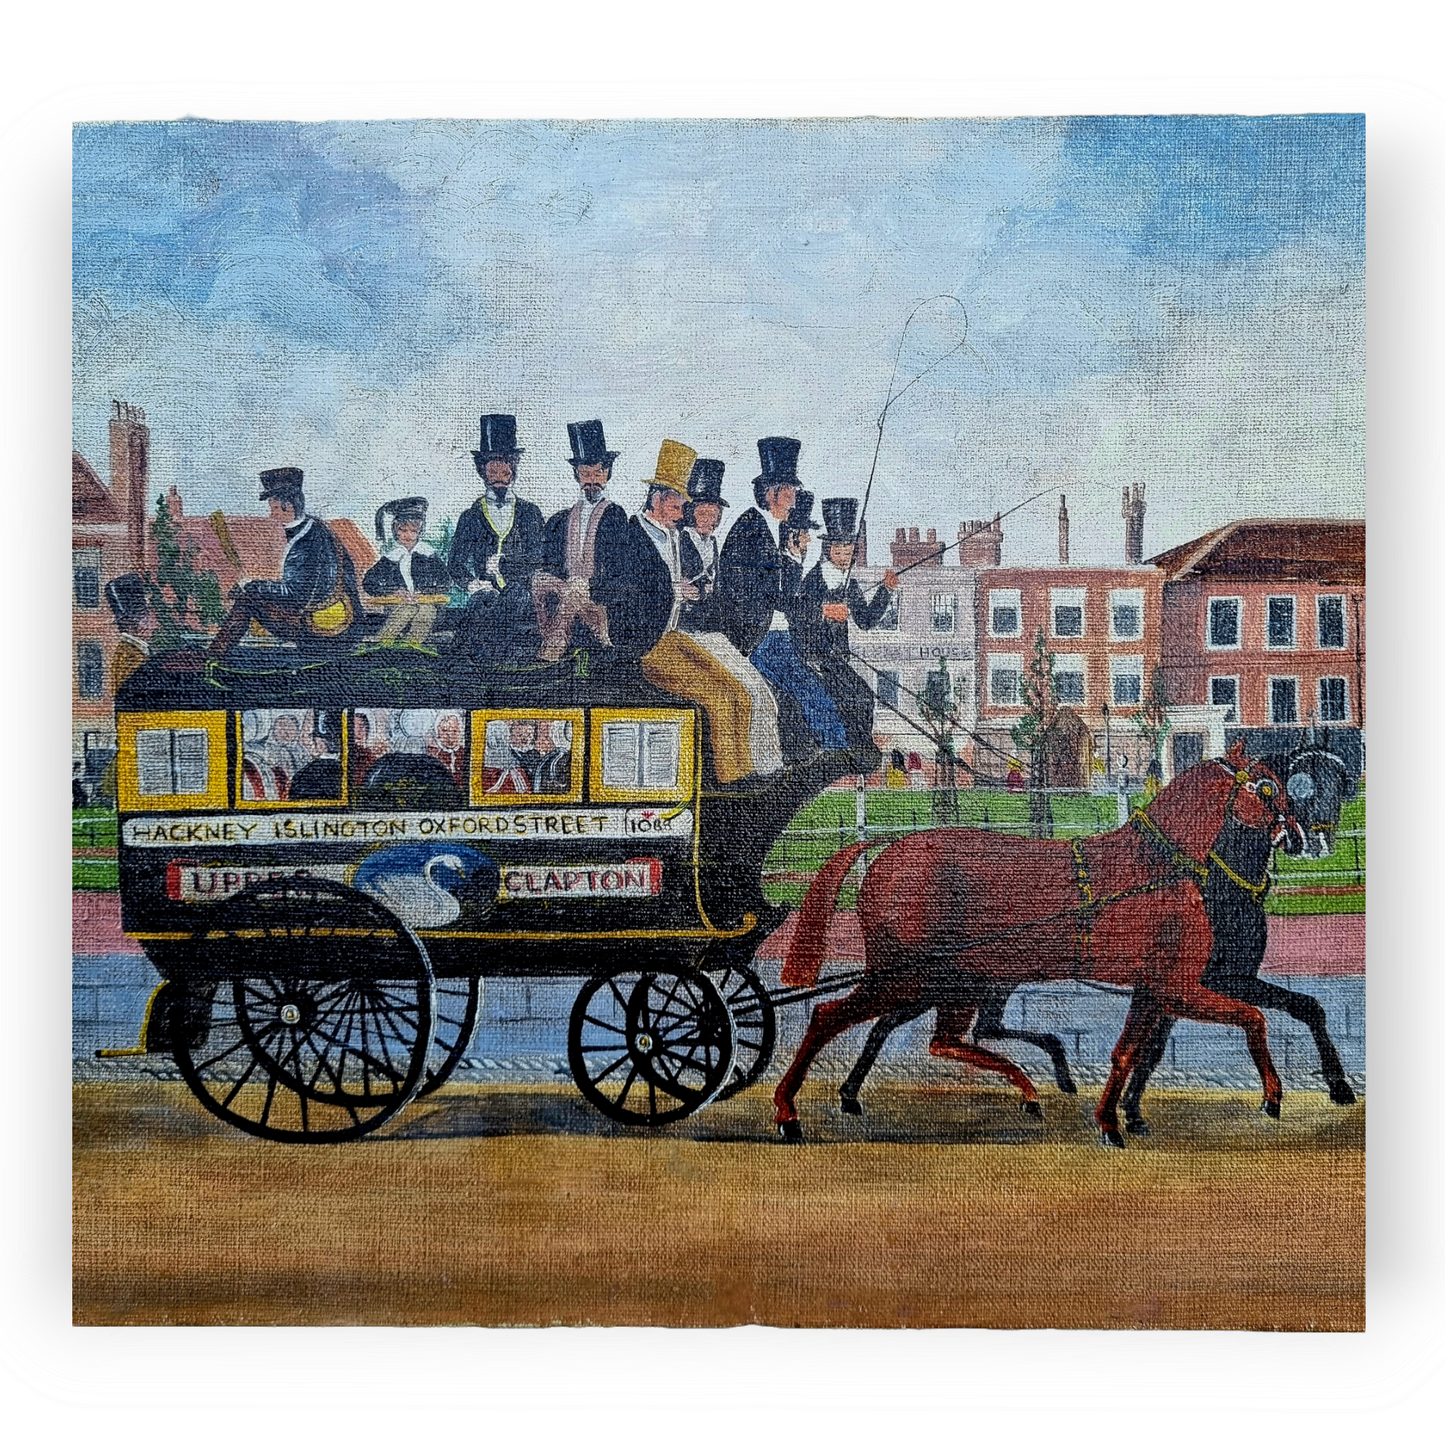 Naive Late 19th Century English School Antique Oil On Canvas Of A London-Based Horse Drawn Bus / Horse-Bus Or Omnibus